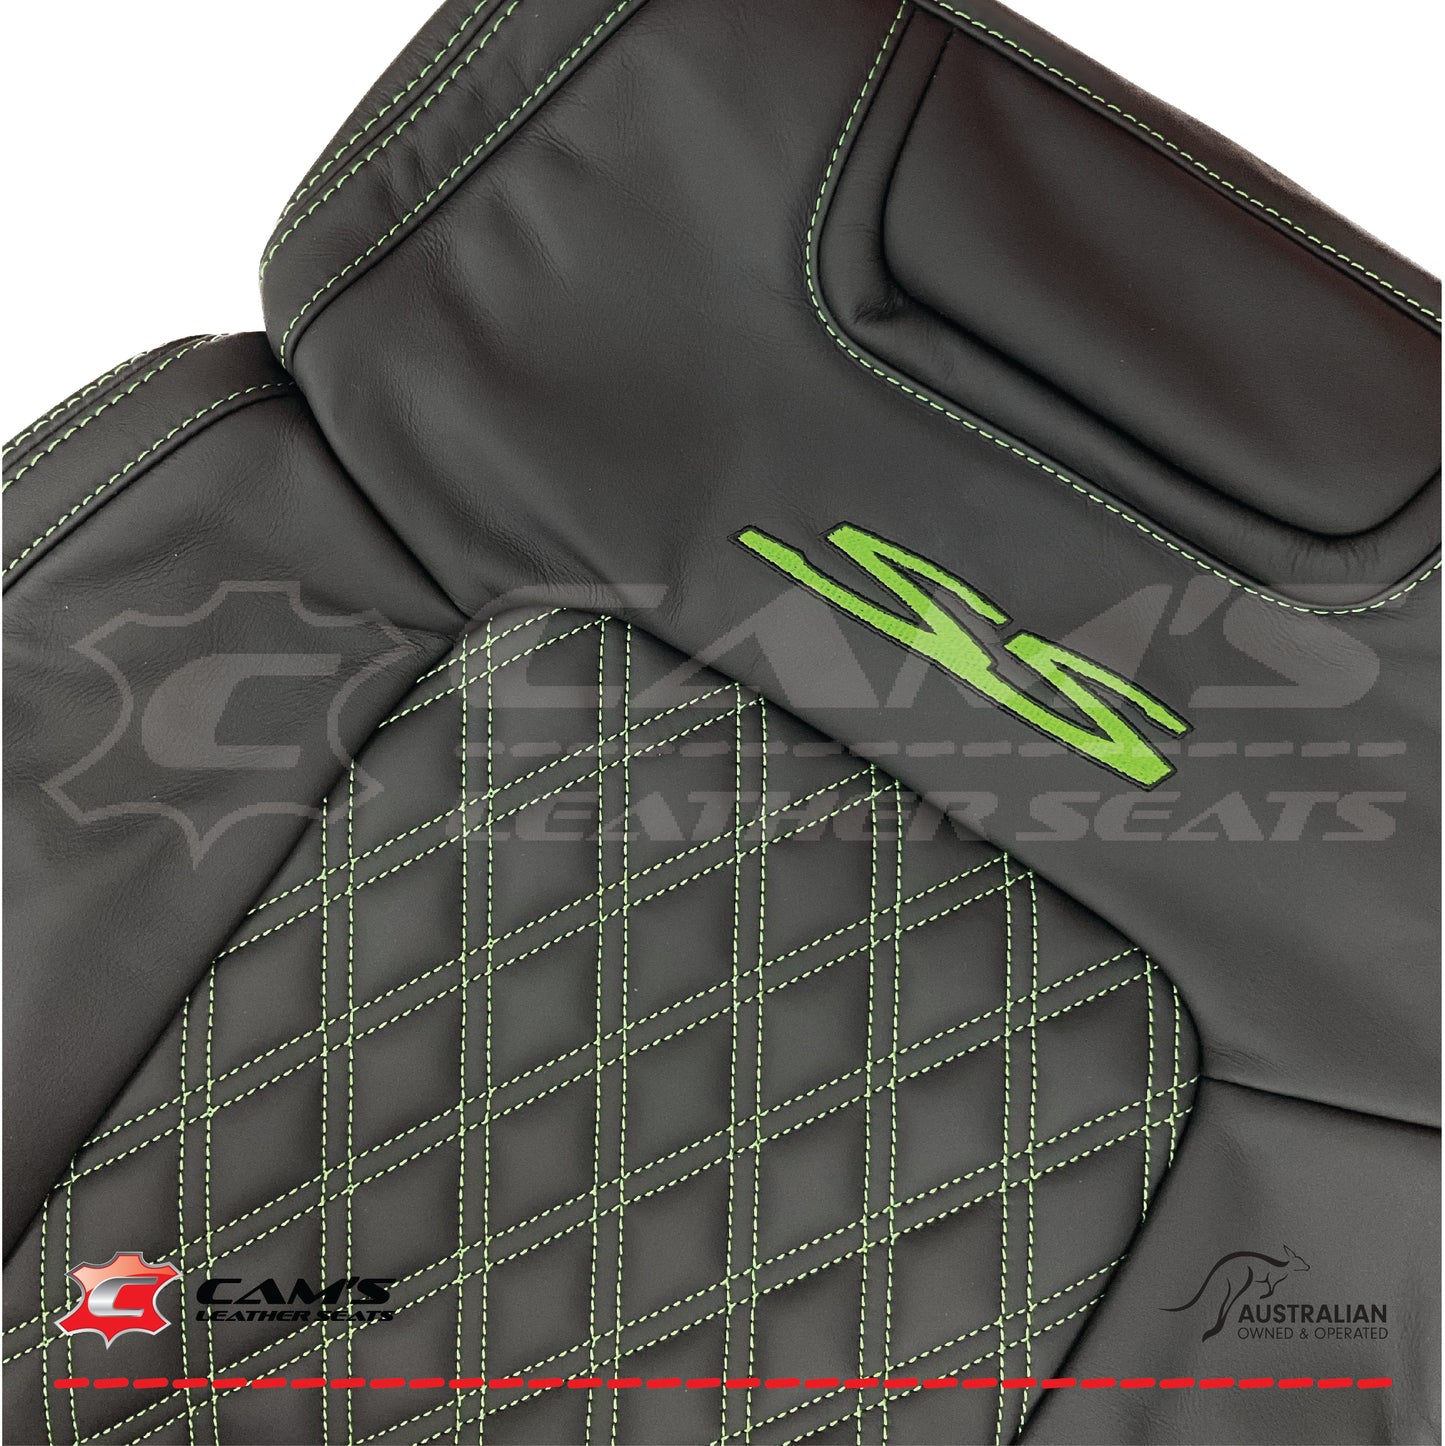 LEATHER SEATS TRIM KIT FOR HOLDEN VE SS UTE BLACK WITH GREEN STITCHING